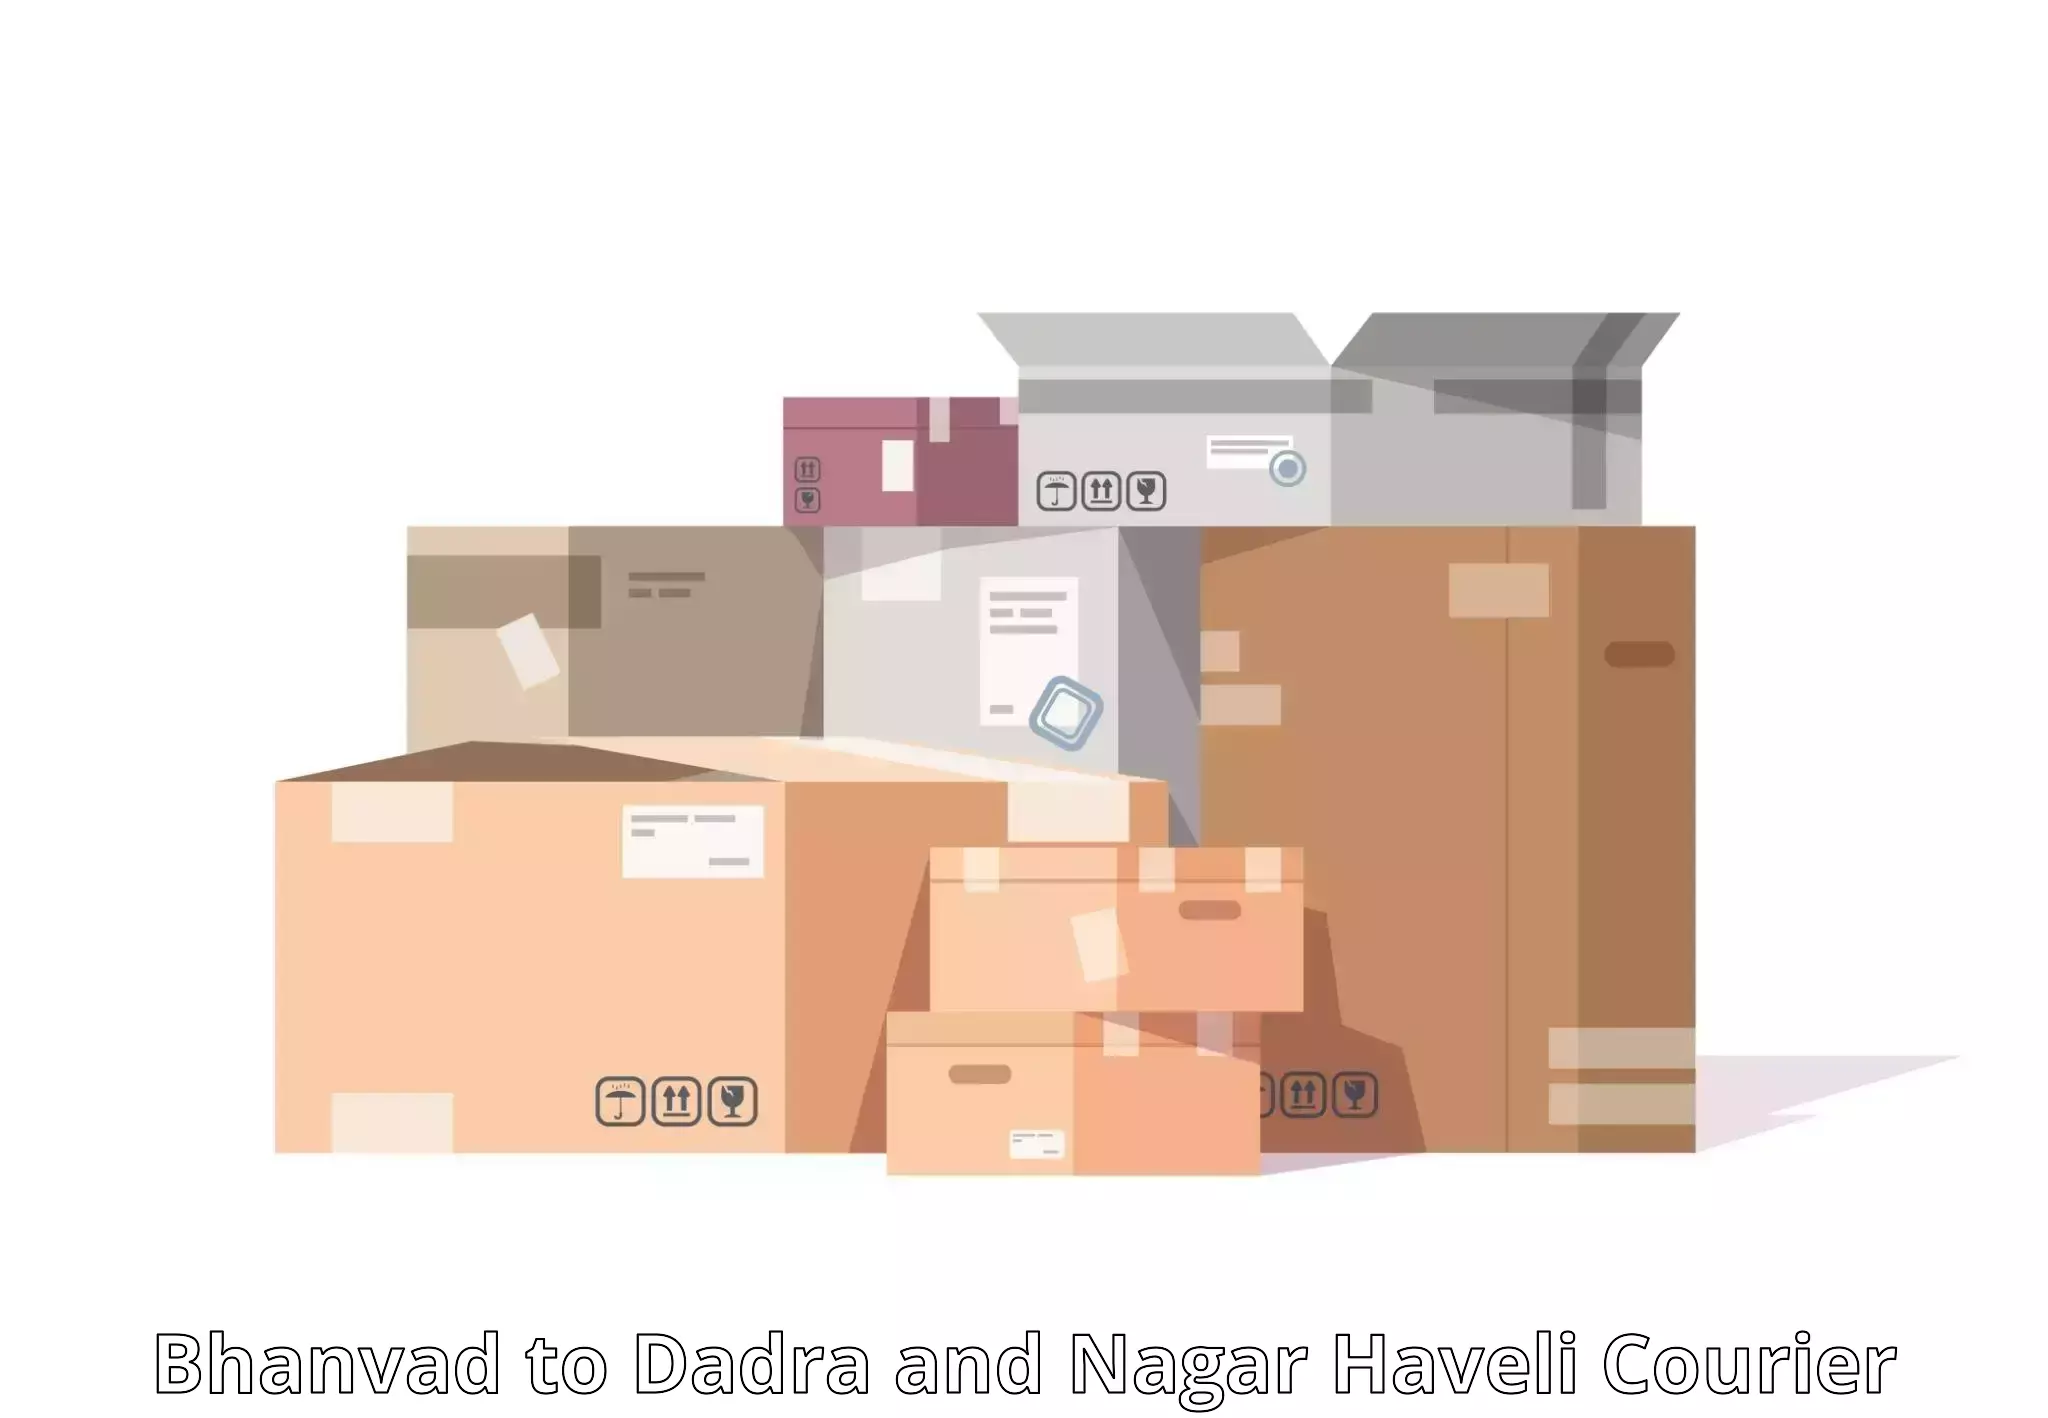 Global courier networks Bhanvad to Dadra and Nagar Haveli